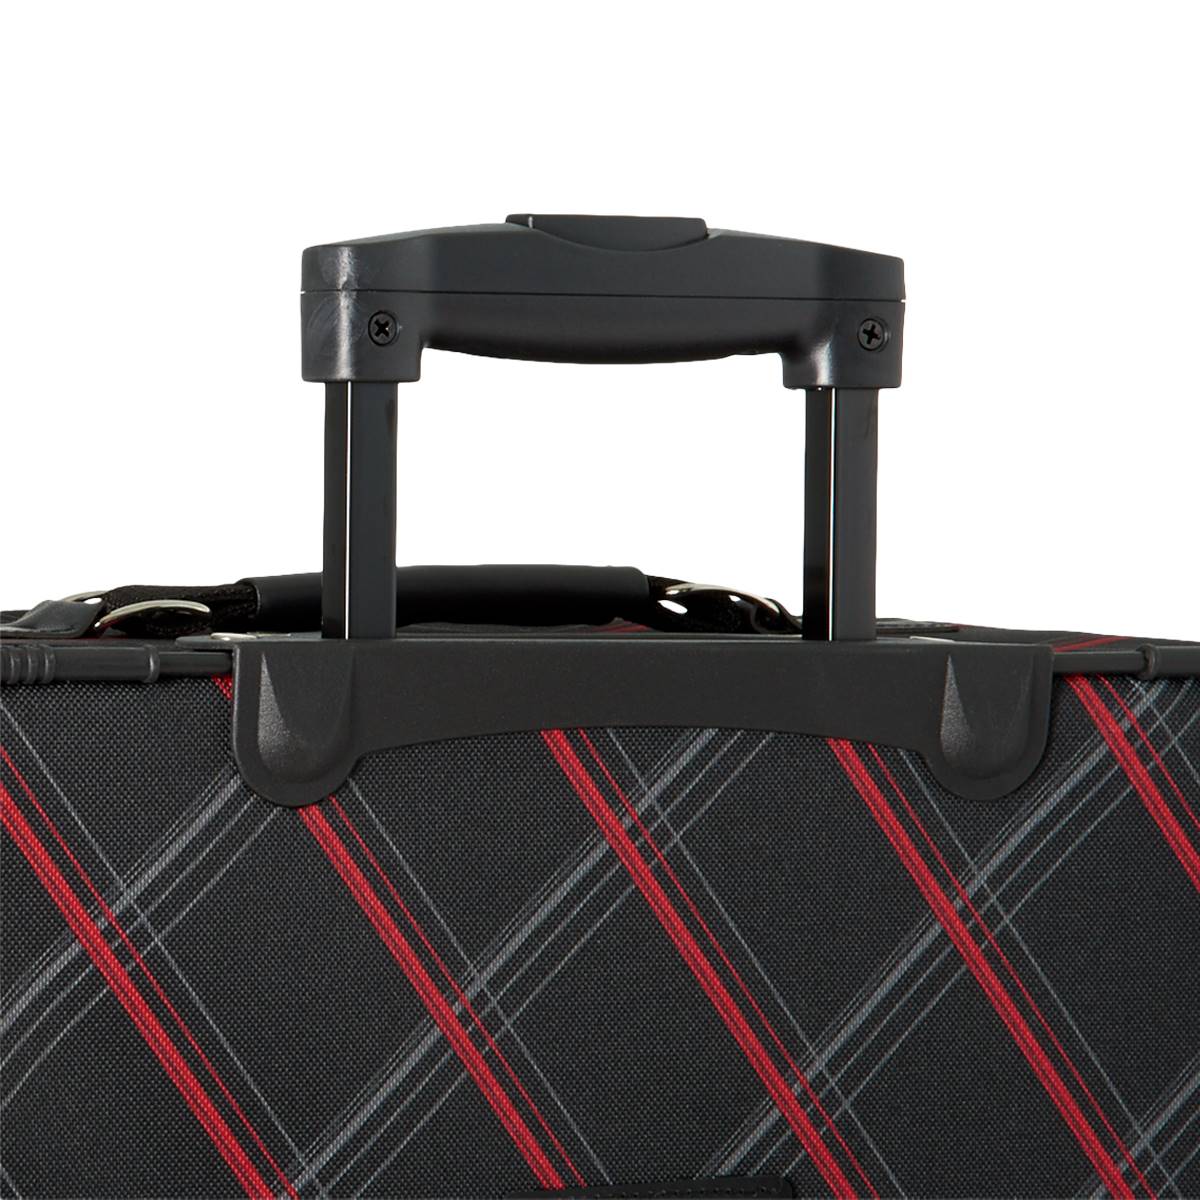 Leisure Lafayette 21in. Spinner Luggage - Black/Red